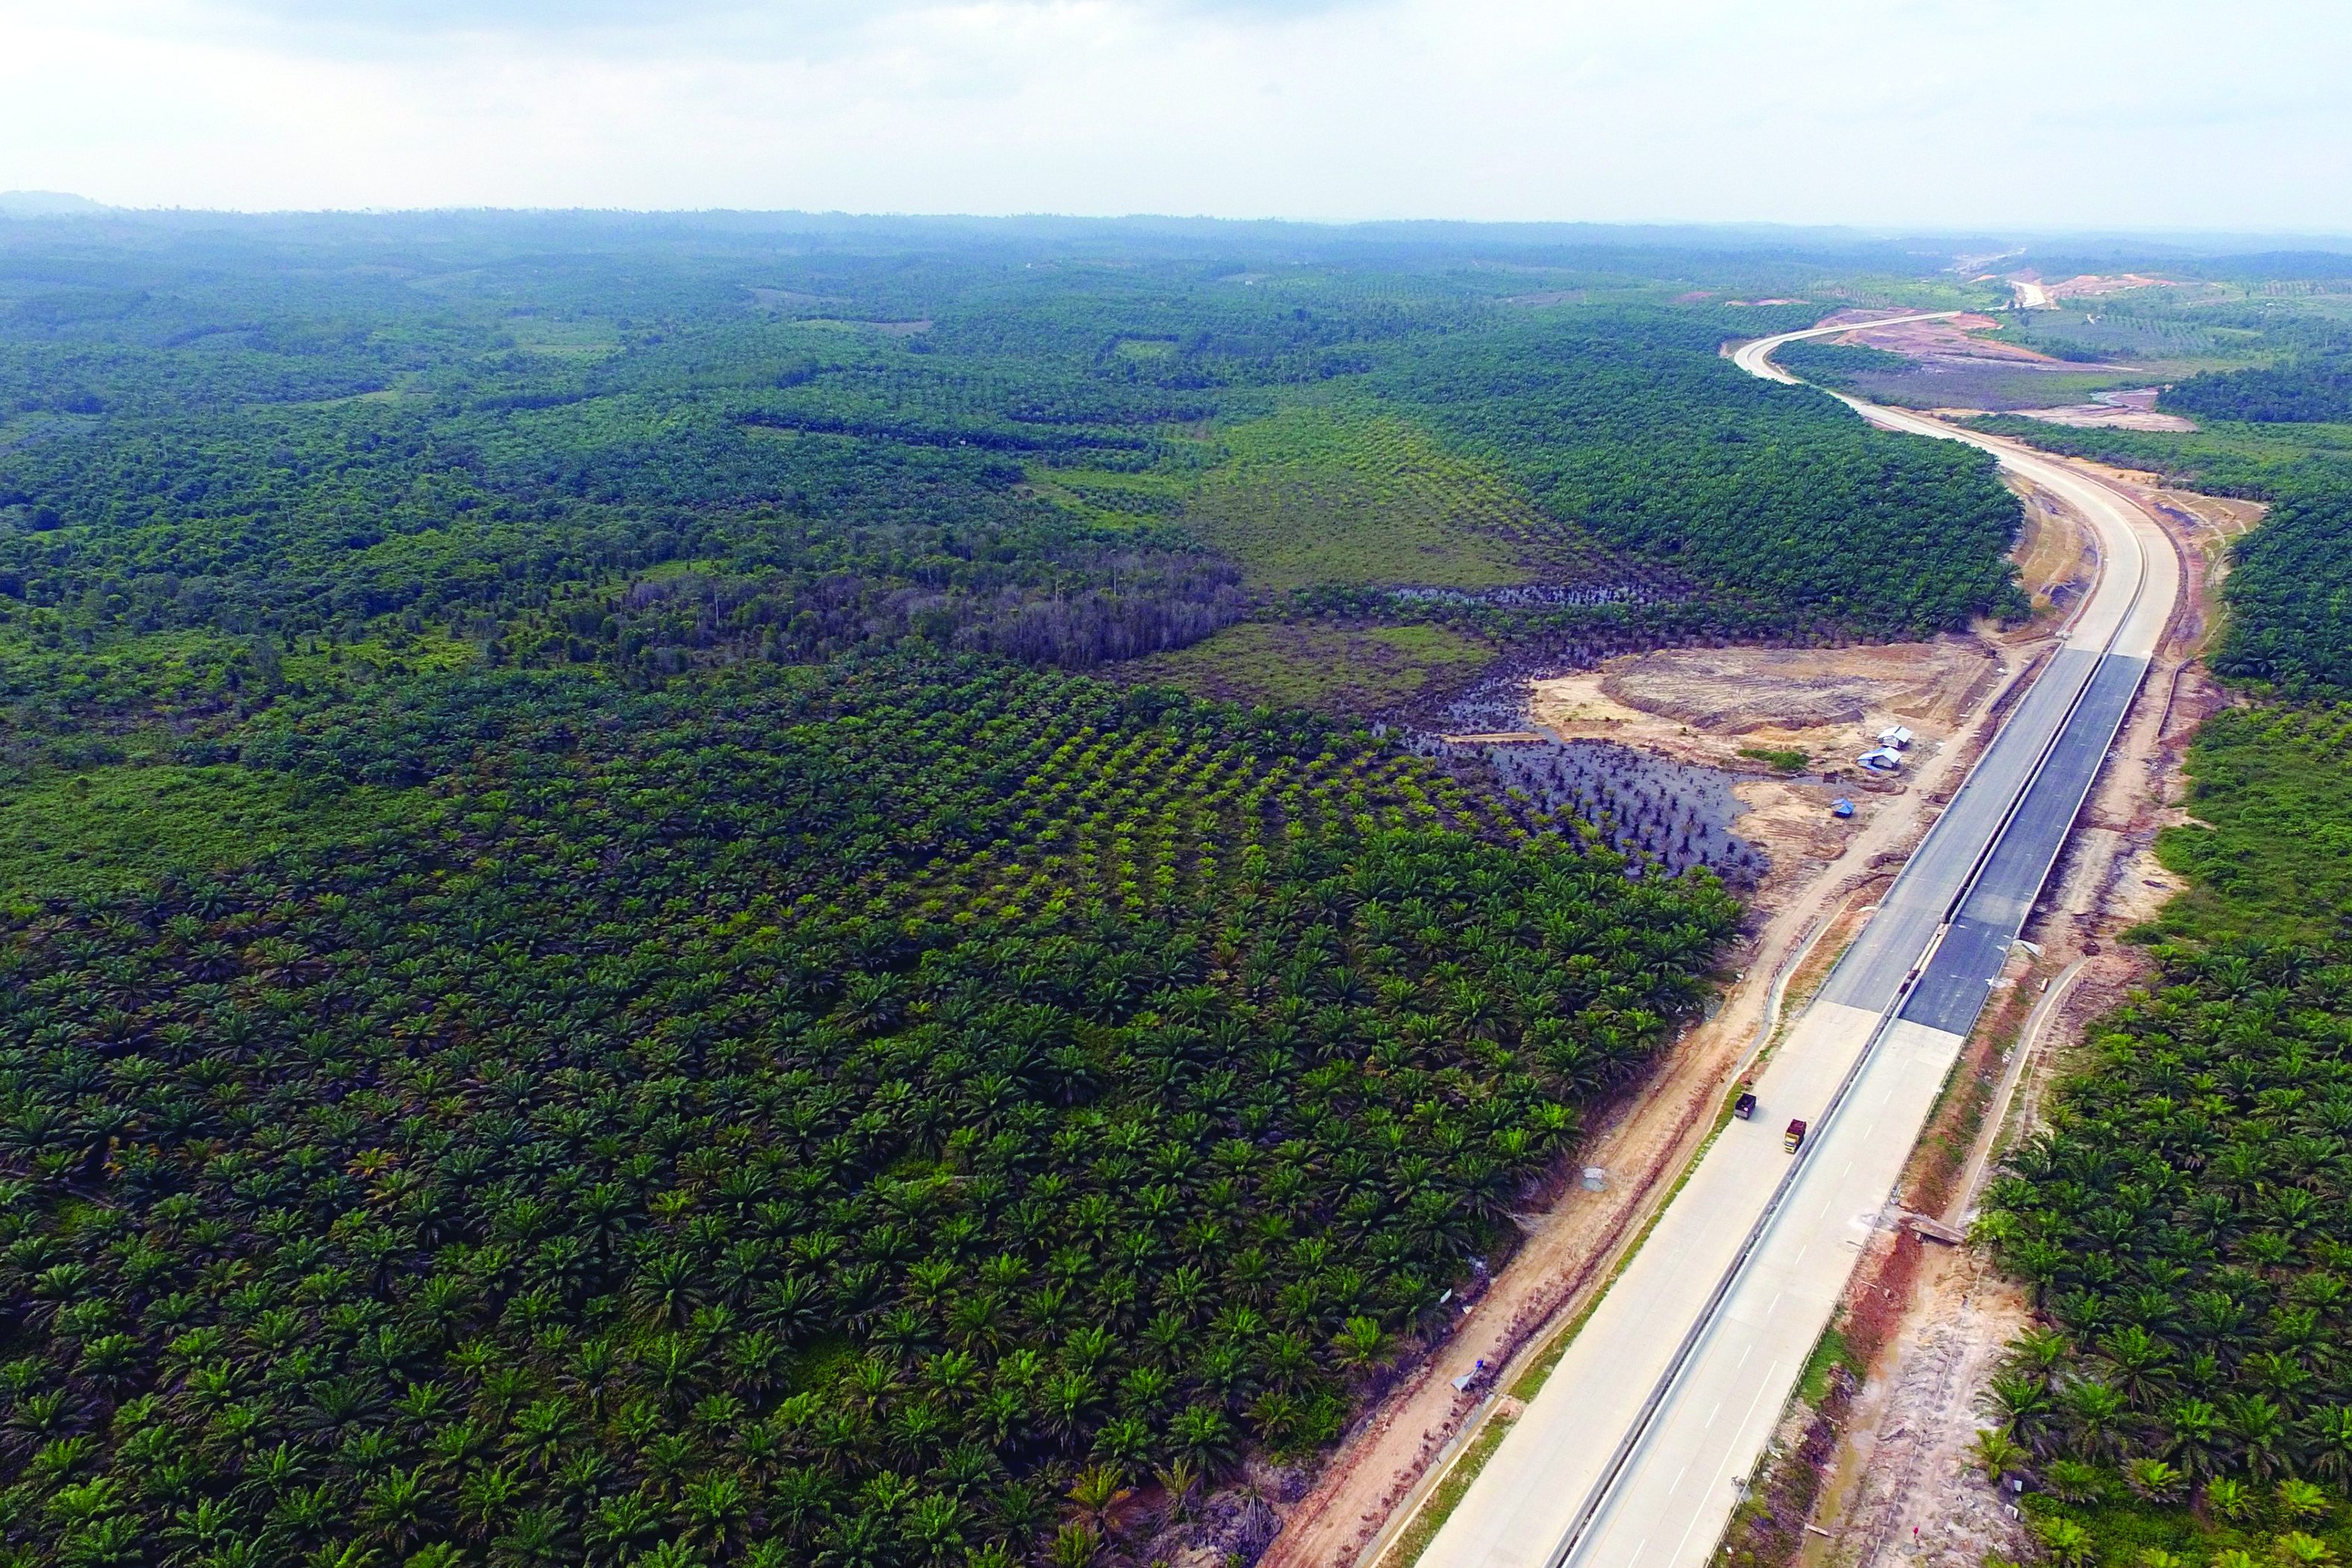 TOPSHOT - This aerial picture taken on July 31, 2019 by news outlet Tribun Kaltim shows a view of the area around Samboja, Kutai Kartanegara, one of two locations proposed by the government for Indonesia's new capital. - Indonesia has chosen the eastern edge of jungle-clad Borneo island for its new capital, President Joko Widodo said on August 26, 2019, as the country looks to shift its political heart away from congested megalopolis Jakarta. (Photo by Fachmi RACHMAN / TRIBUN KALTIM / AFP)